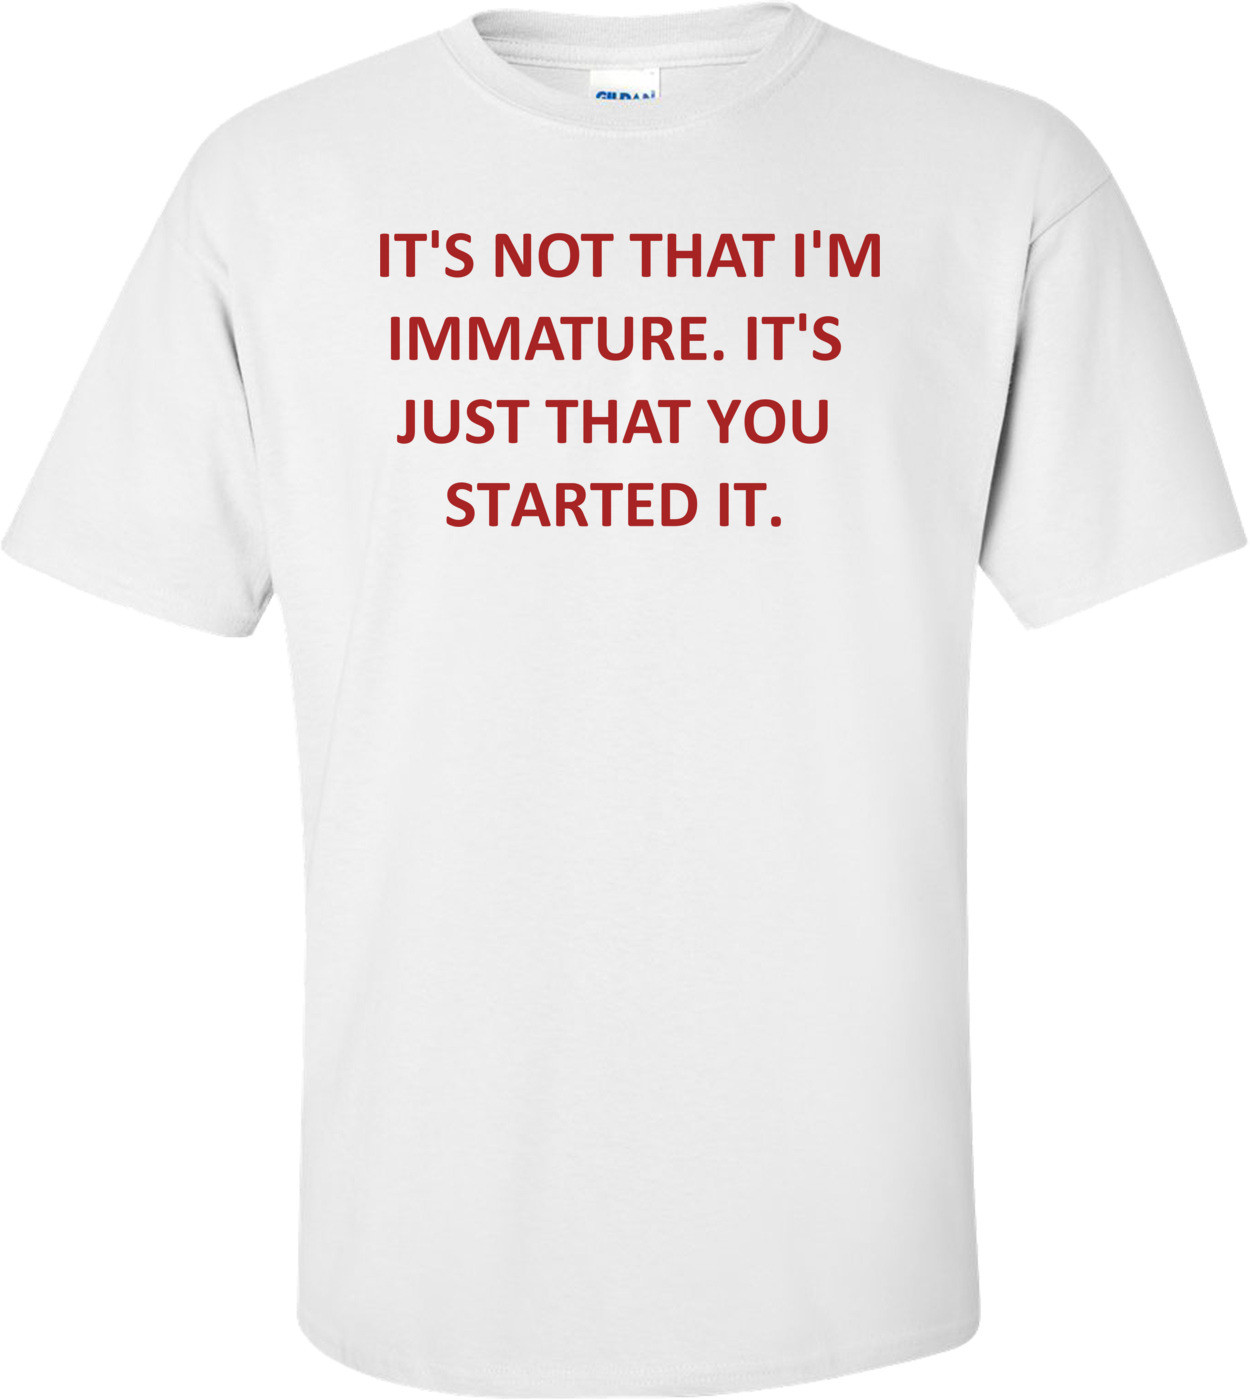   IT'S NOT THAT I'M IMMATURE. IT'S JUST THAT YOU STARTED IT. Shirt